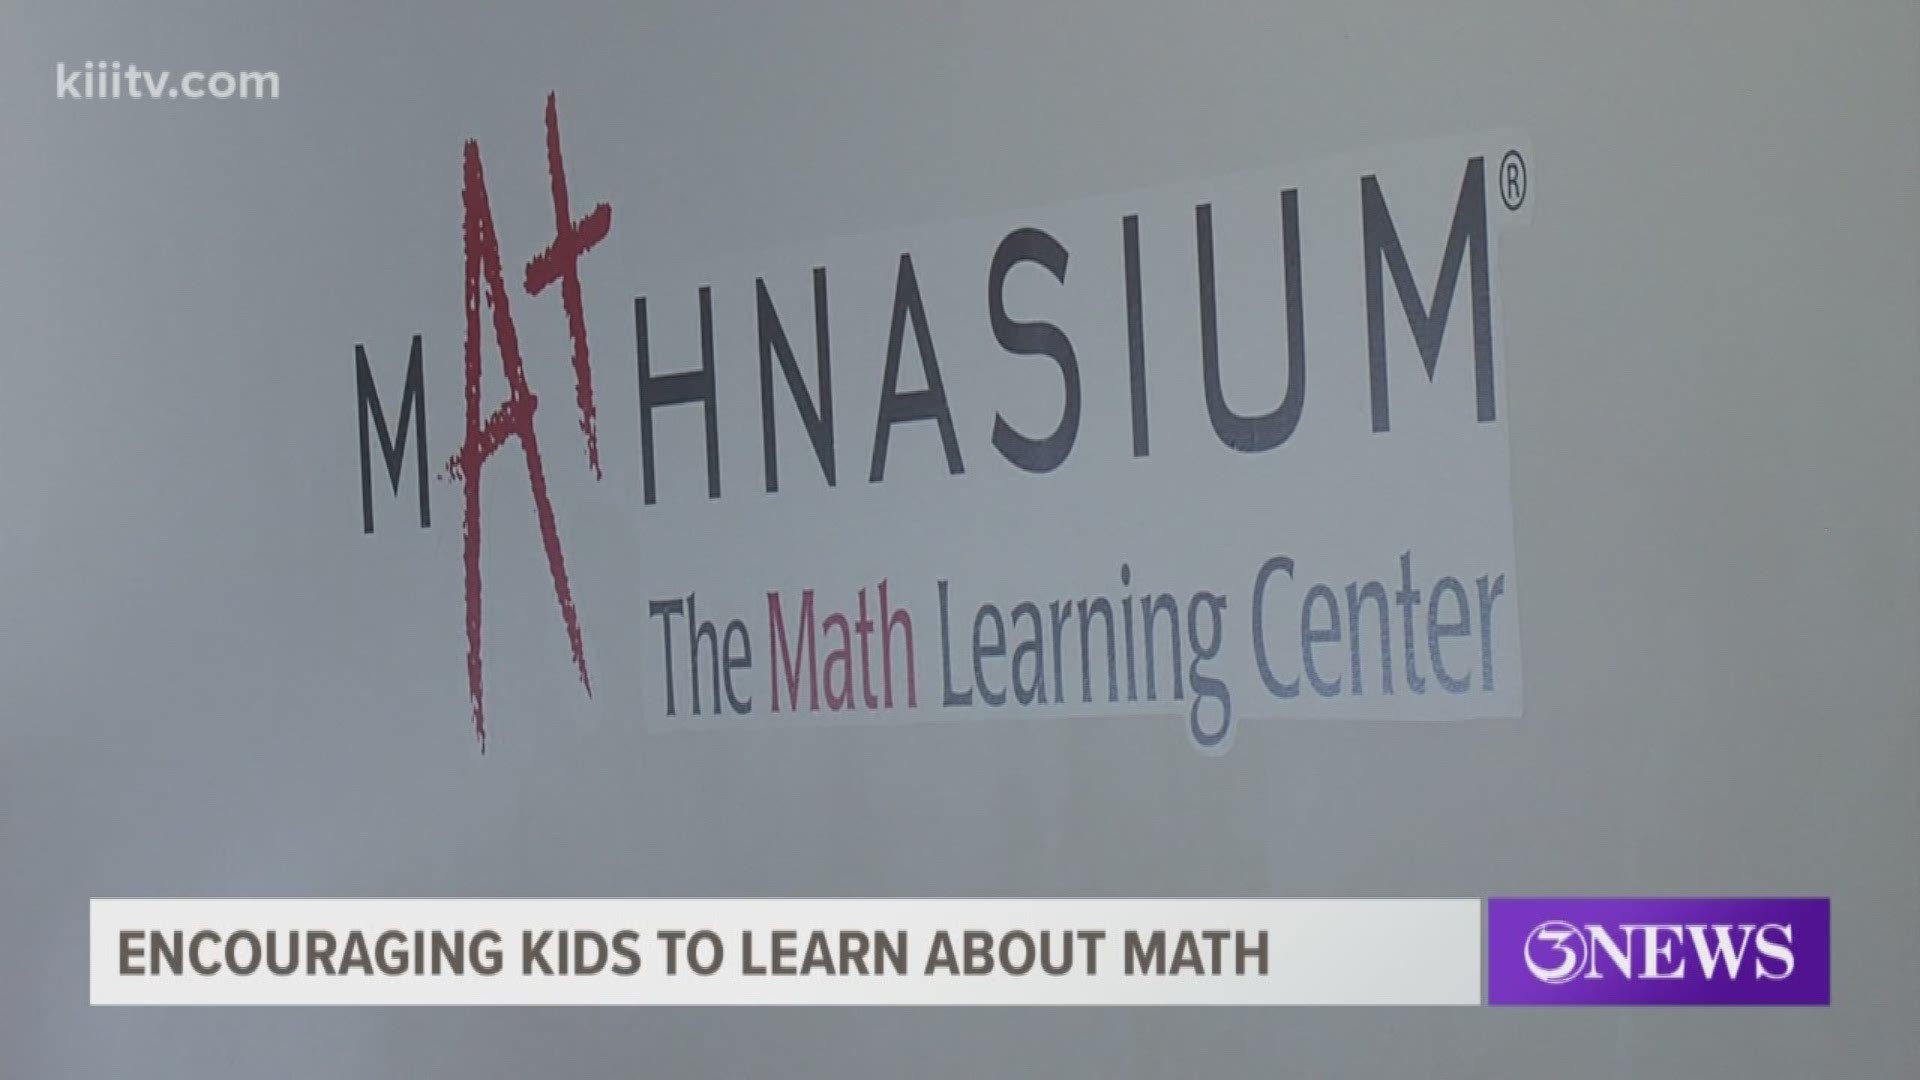 Students from 2nd through 12th grade can sign up to get help improving their math test scores at the Mathnasium, located at 7426 South Staples Street.